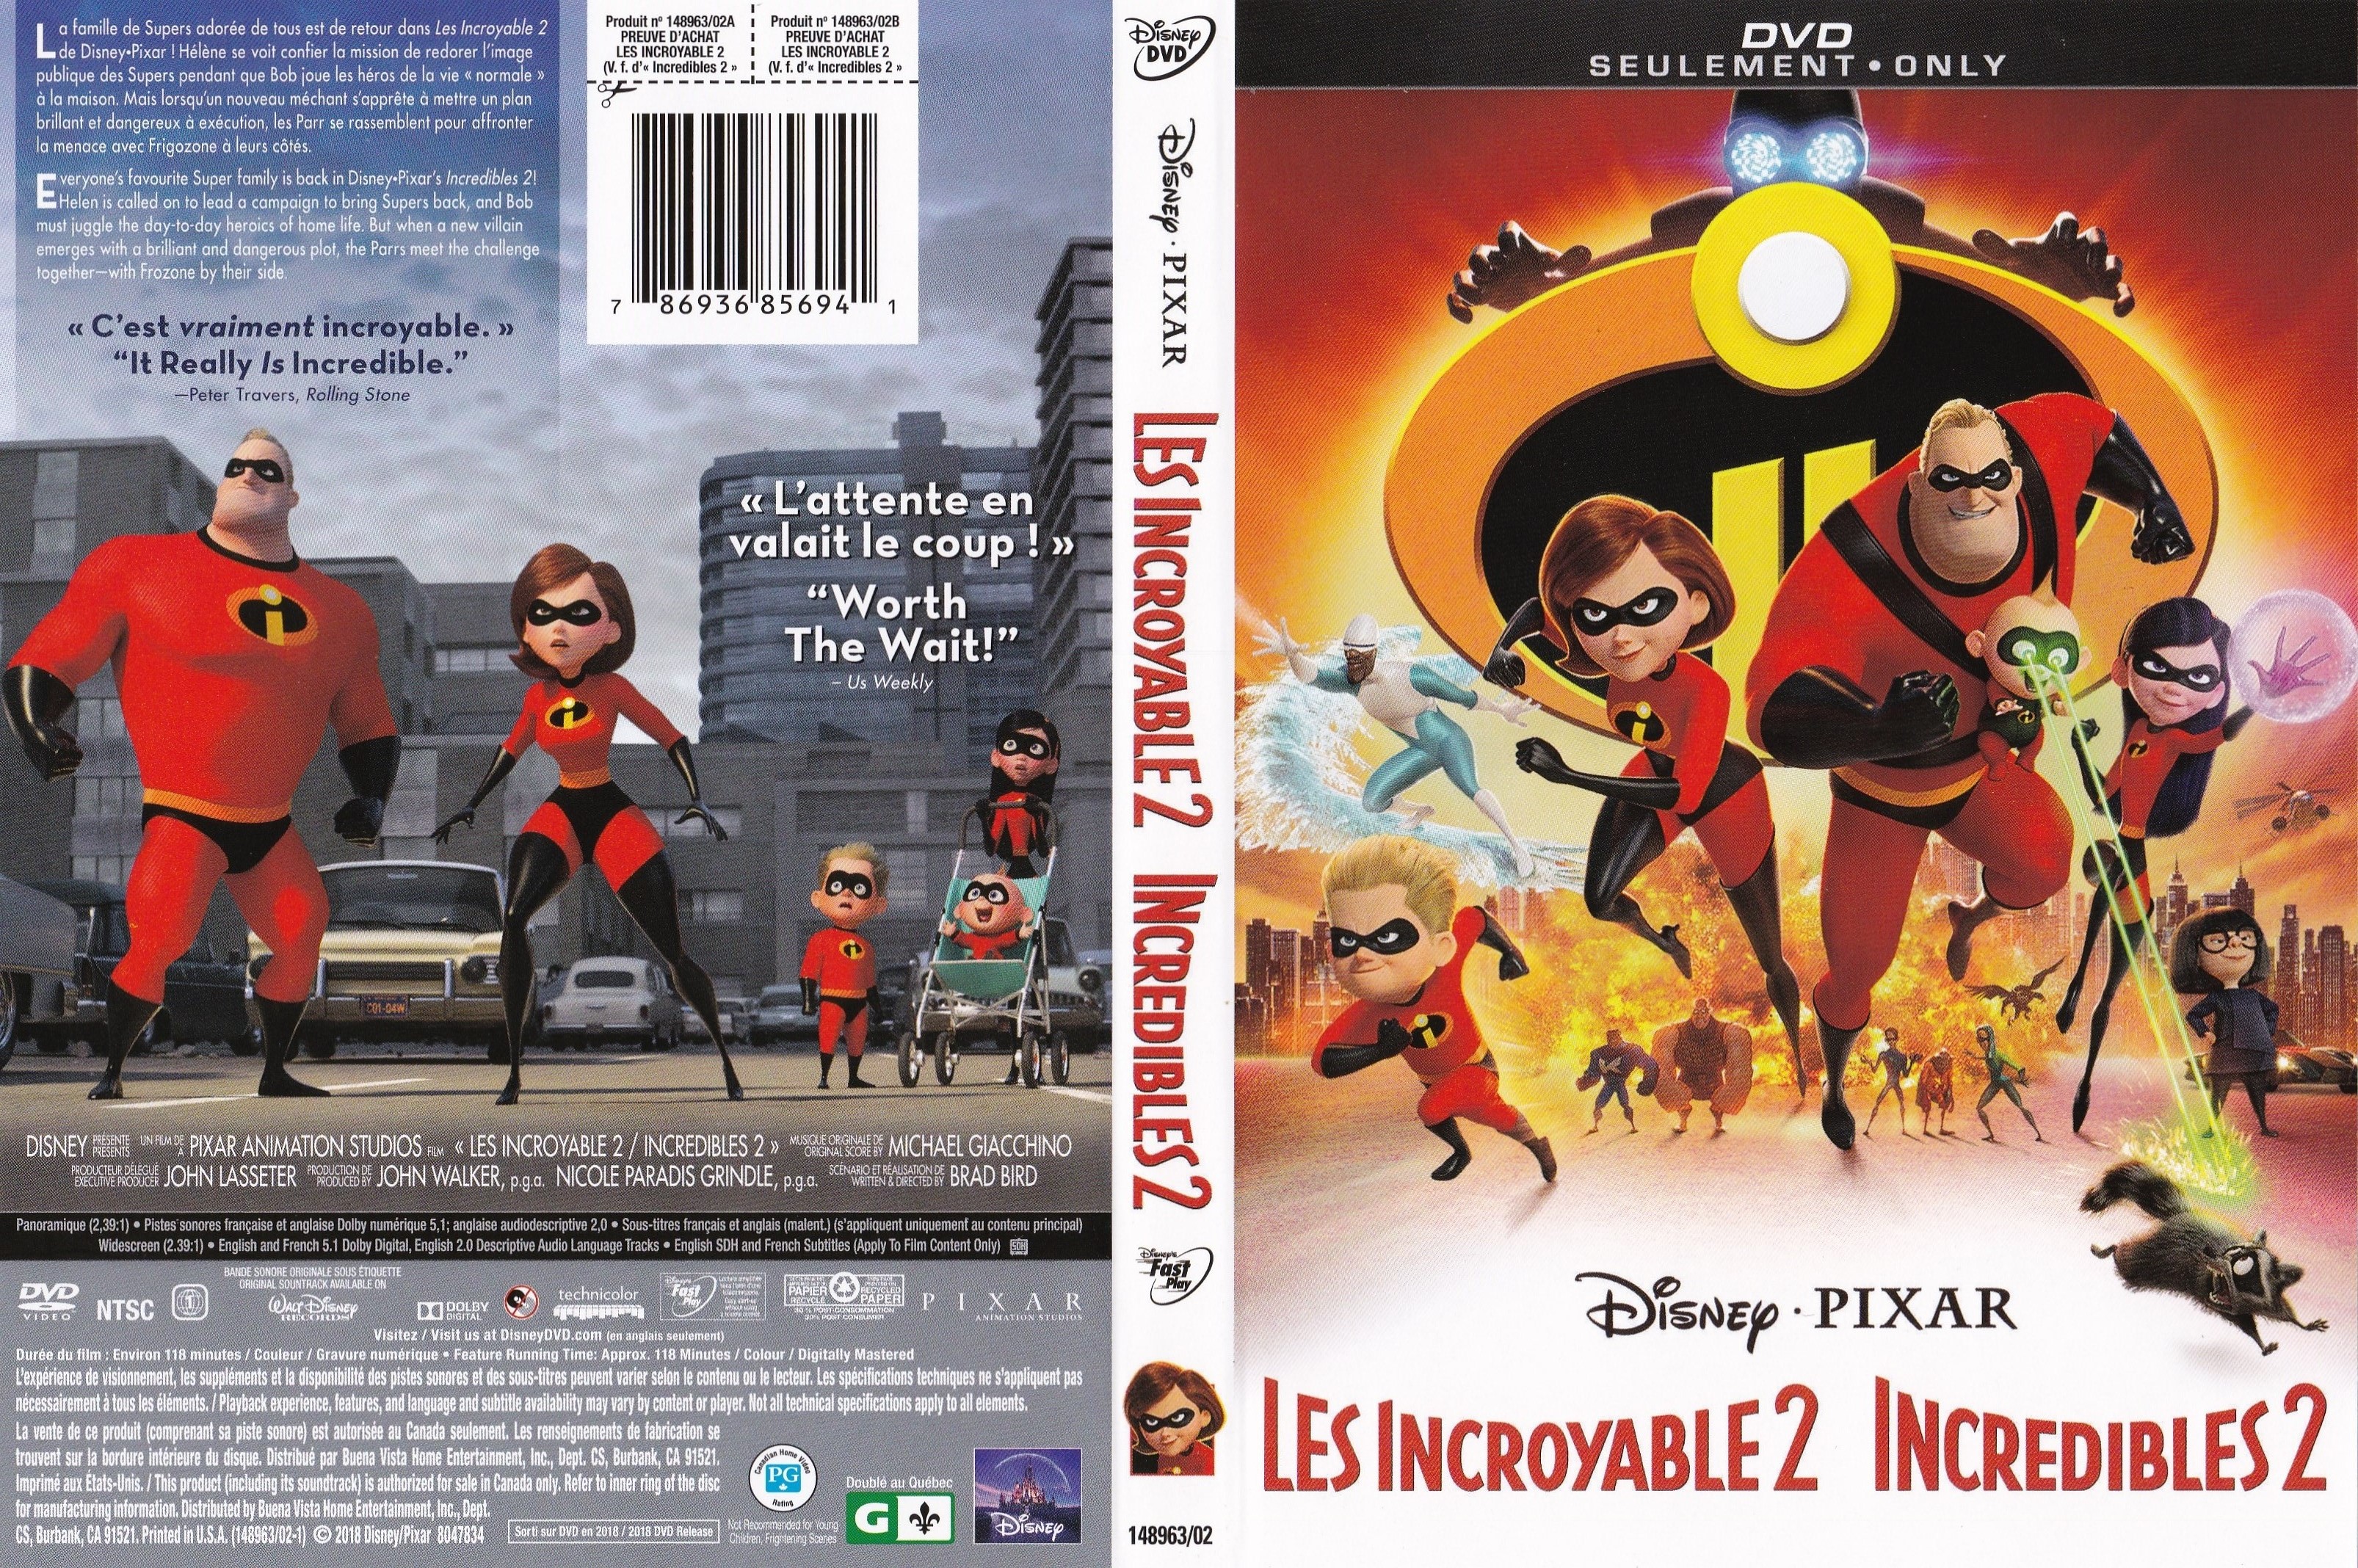 Jaquette DVD Les incroyables 2 - The incredible 2 (Canadienne)